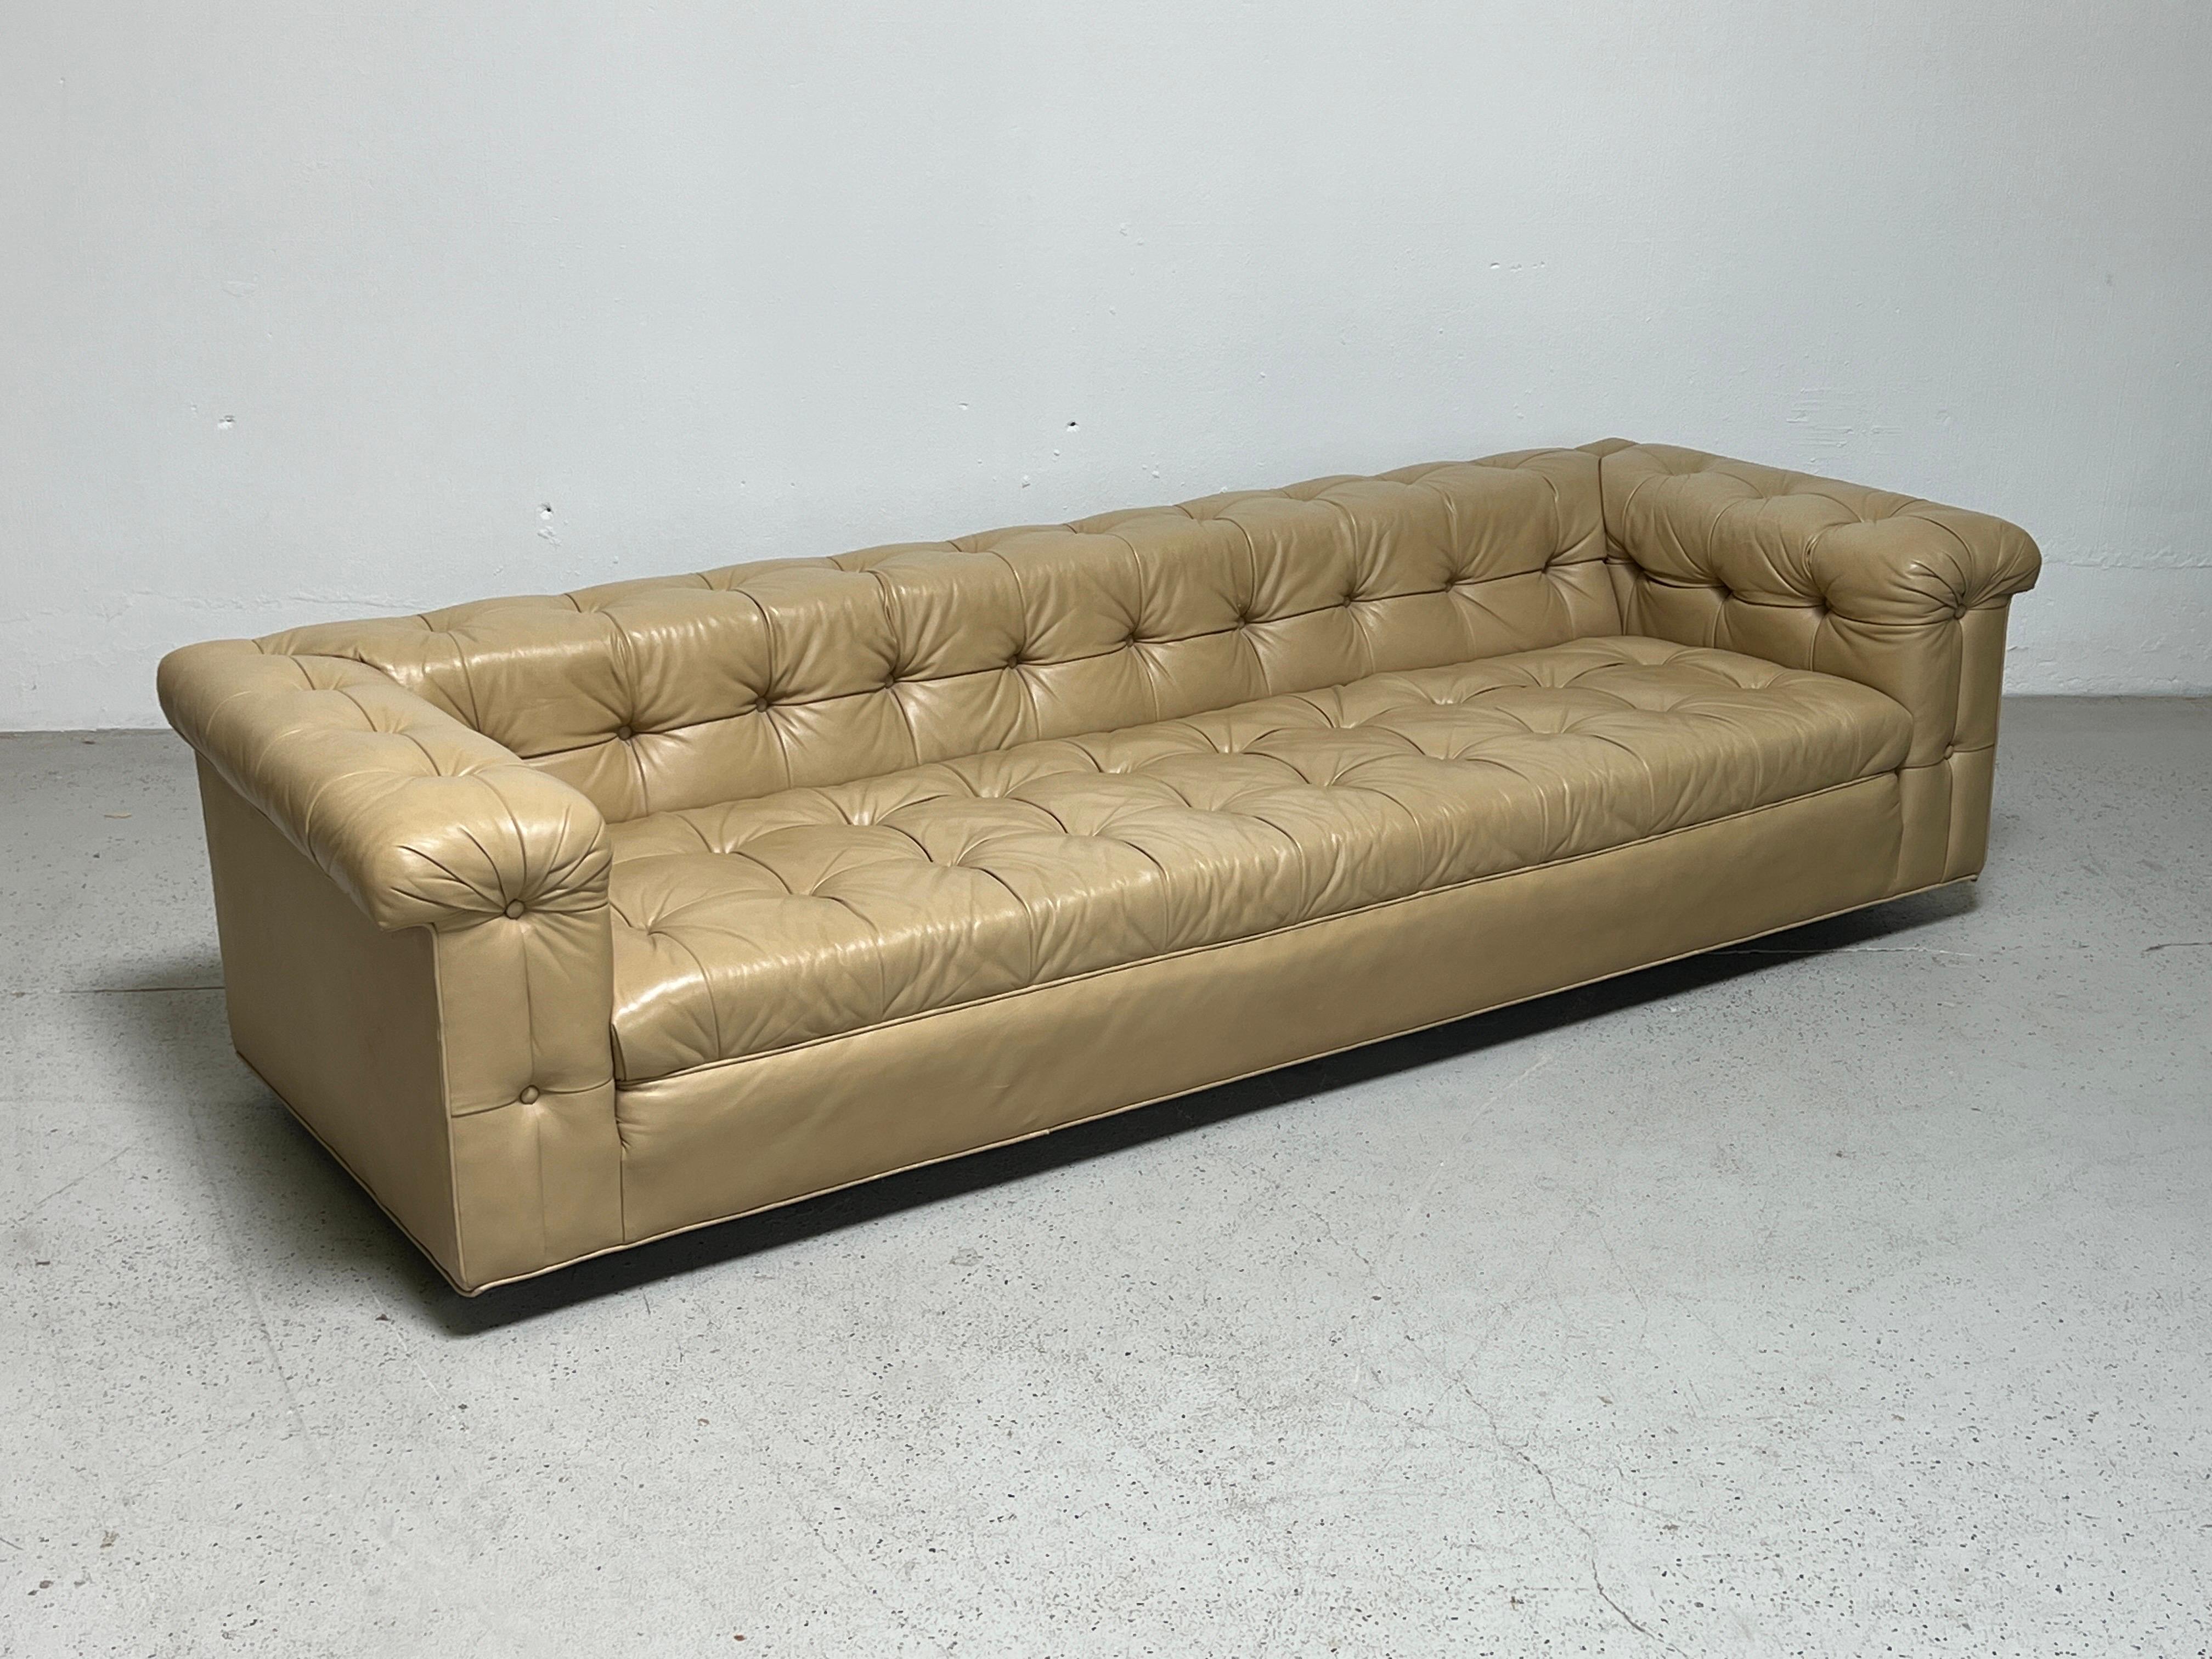 Pair of Party Sofas by Edward Wormley for Dunbar in Original Leather For Sale 5